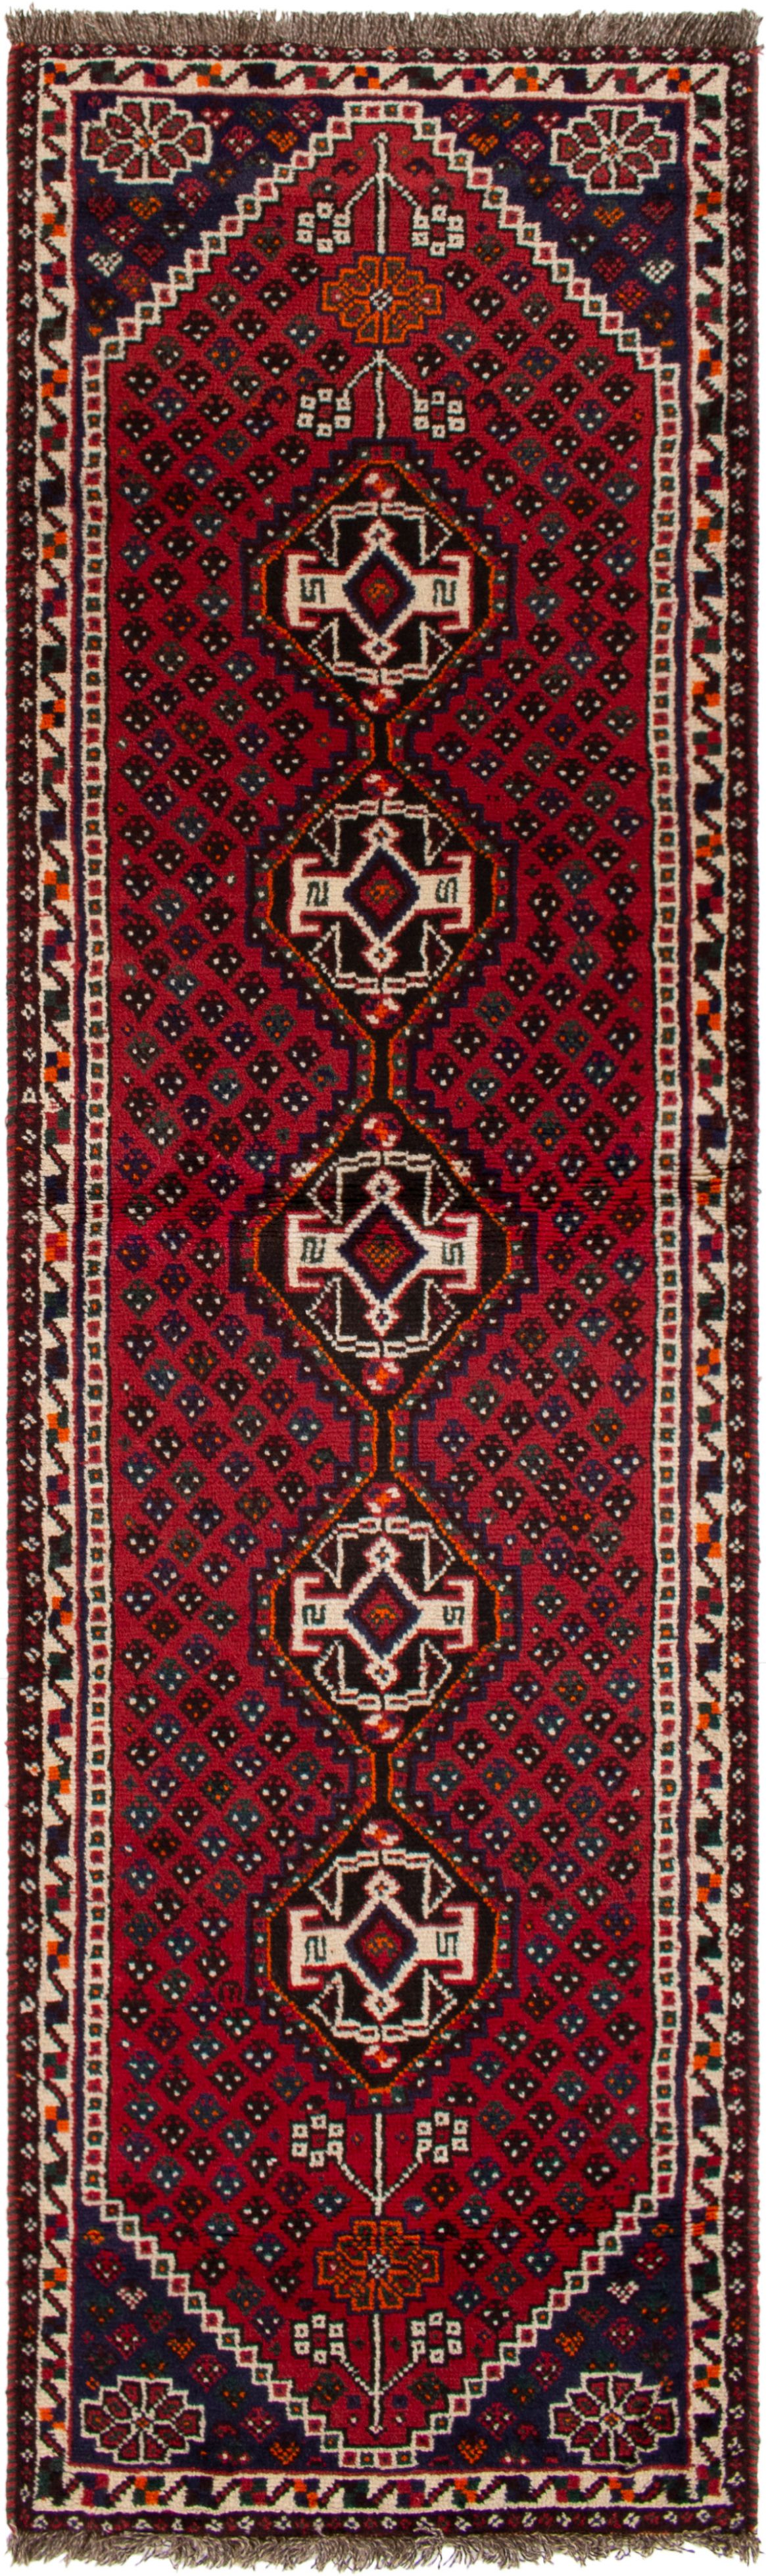 Hand-knotted Shiraz  Wool Rug 2'9" x 9'8" Size: 2'9" x 9'8"  